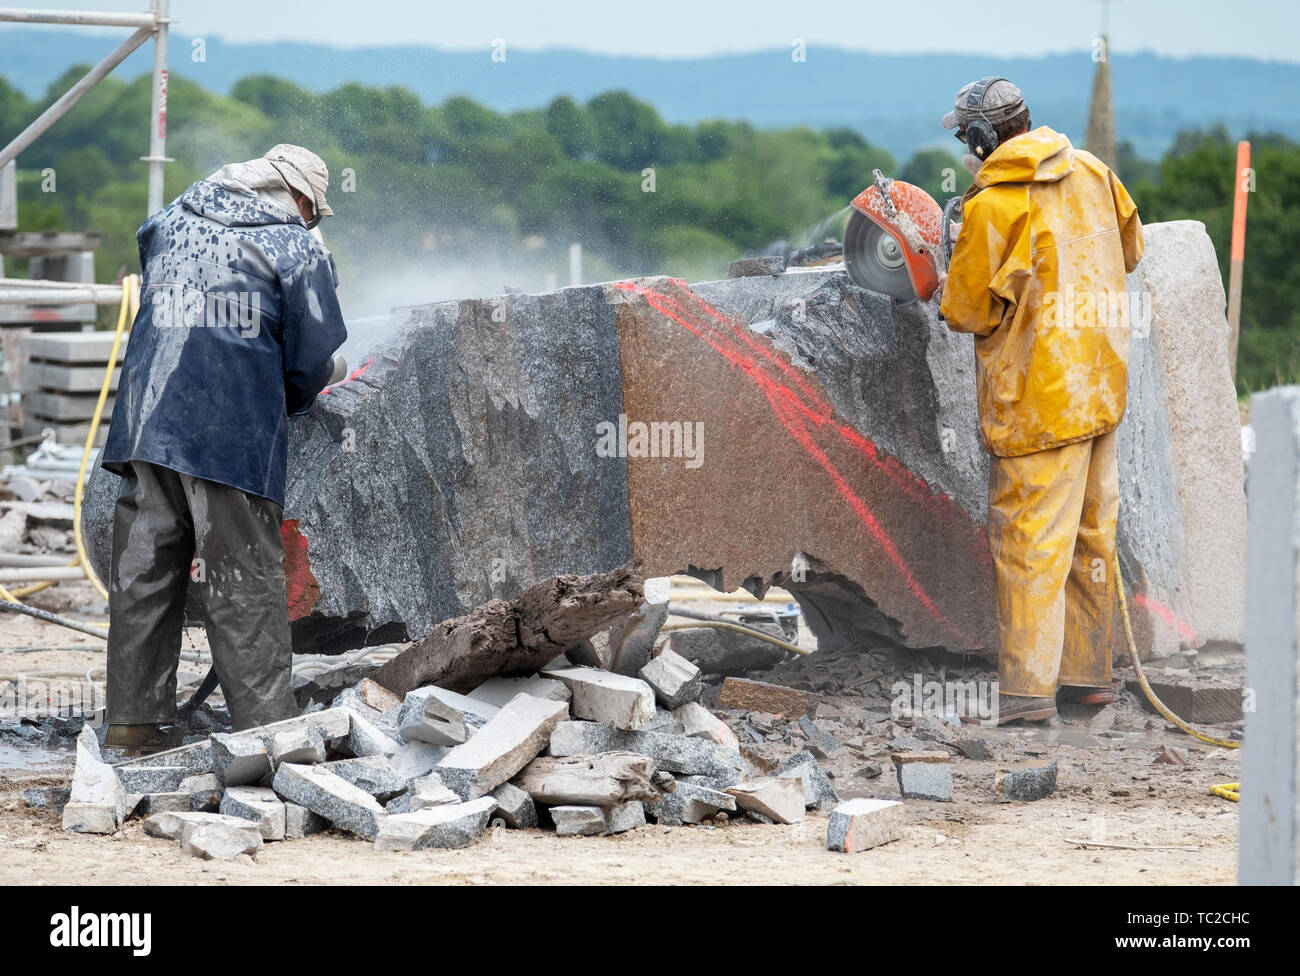 Sculptors cutting granite sculpture in the Valley of the Saints, Quenequillec, Brittany, France. Stock Photo